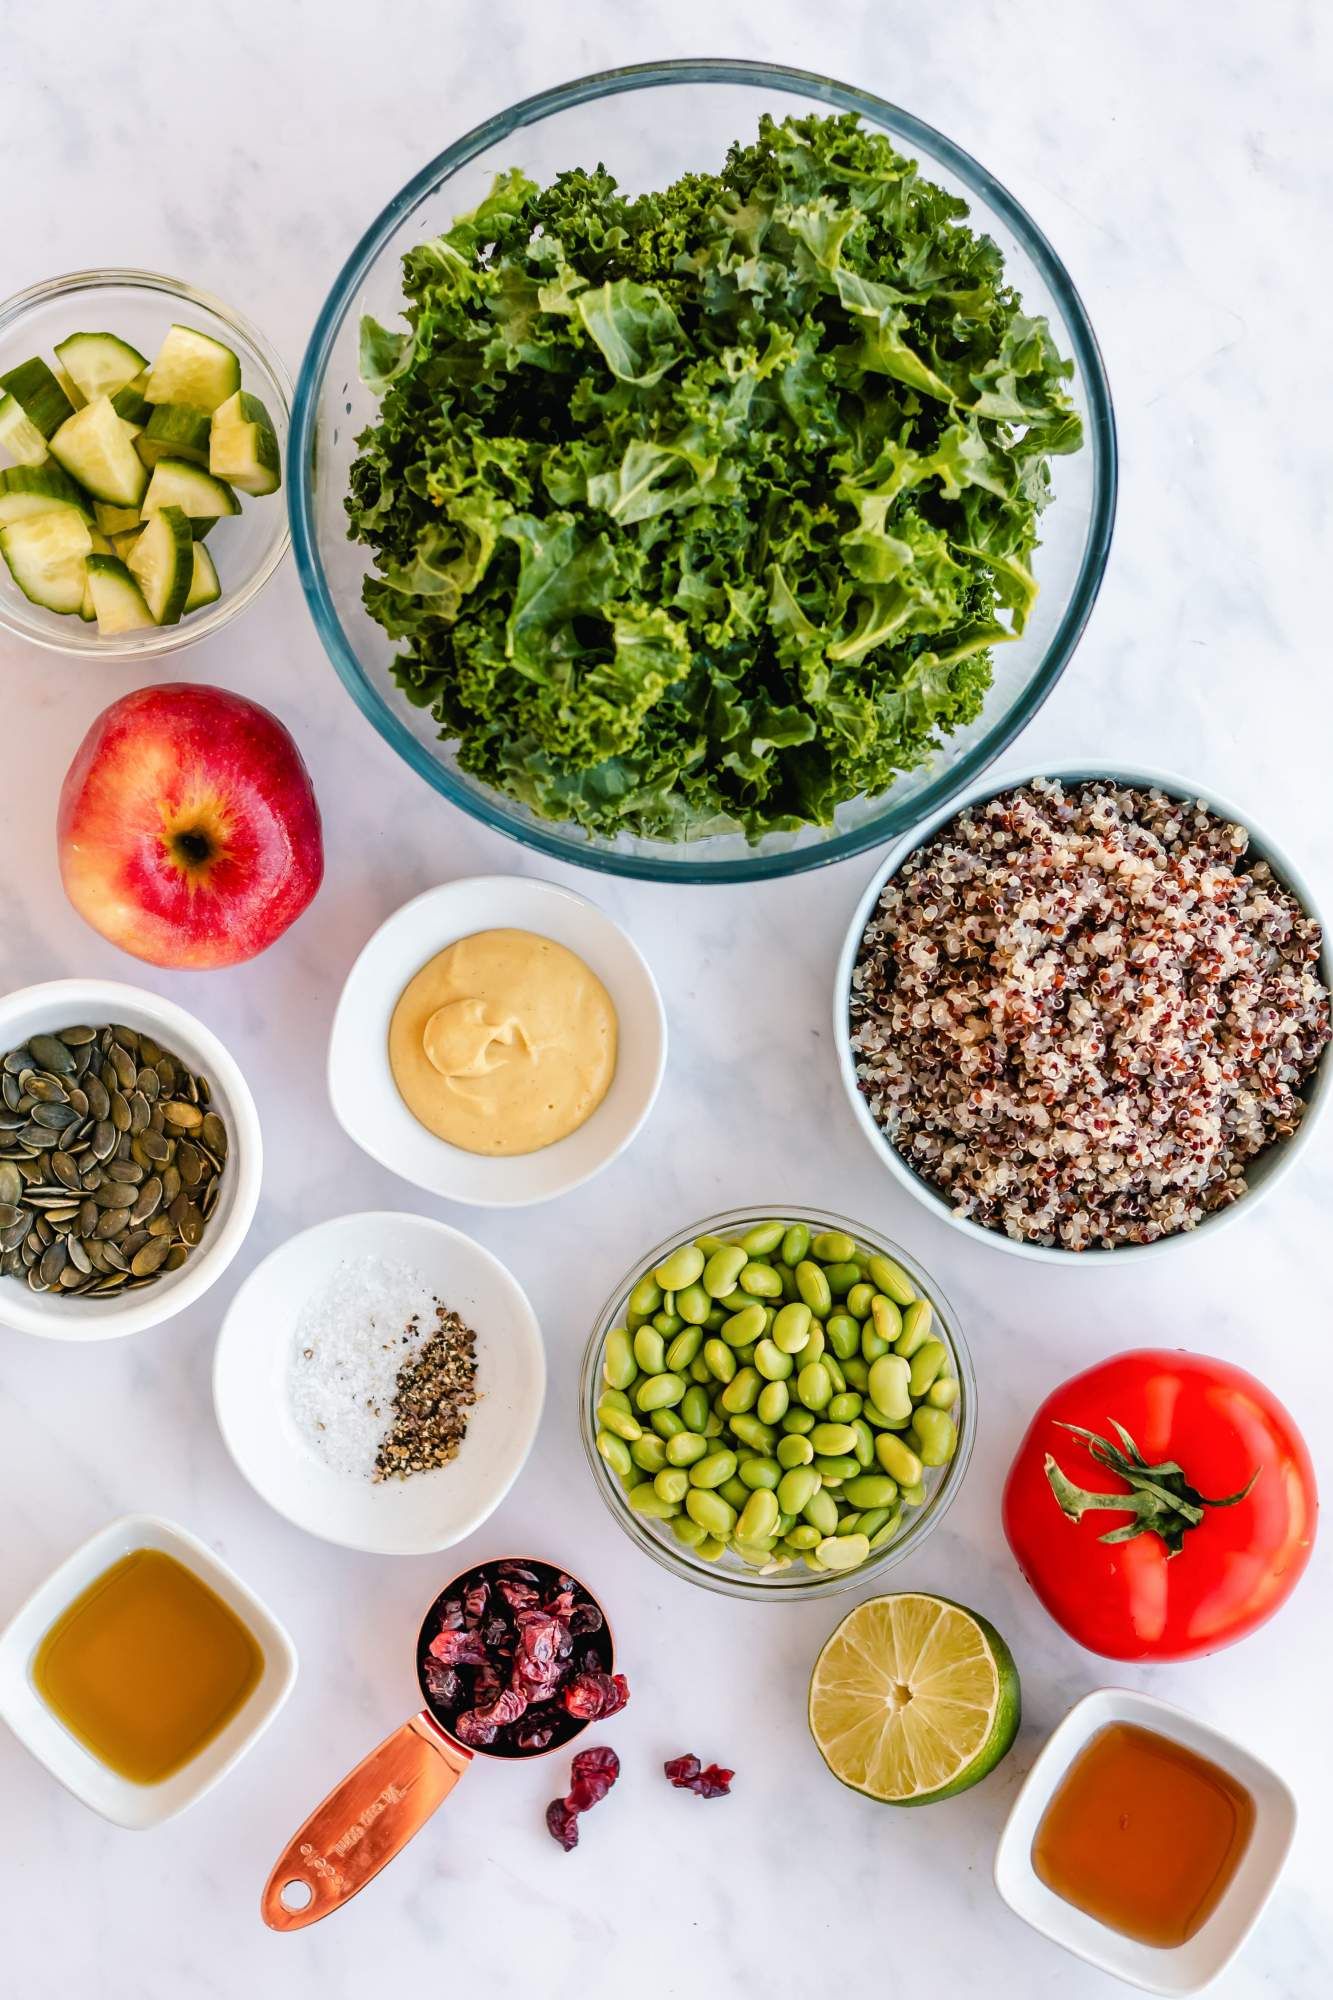 Ingredients for kale quinoa salad with cooked quinoa, massaged kale, apples, edamame, honey lime dressing, and more.